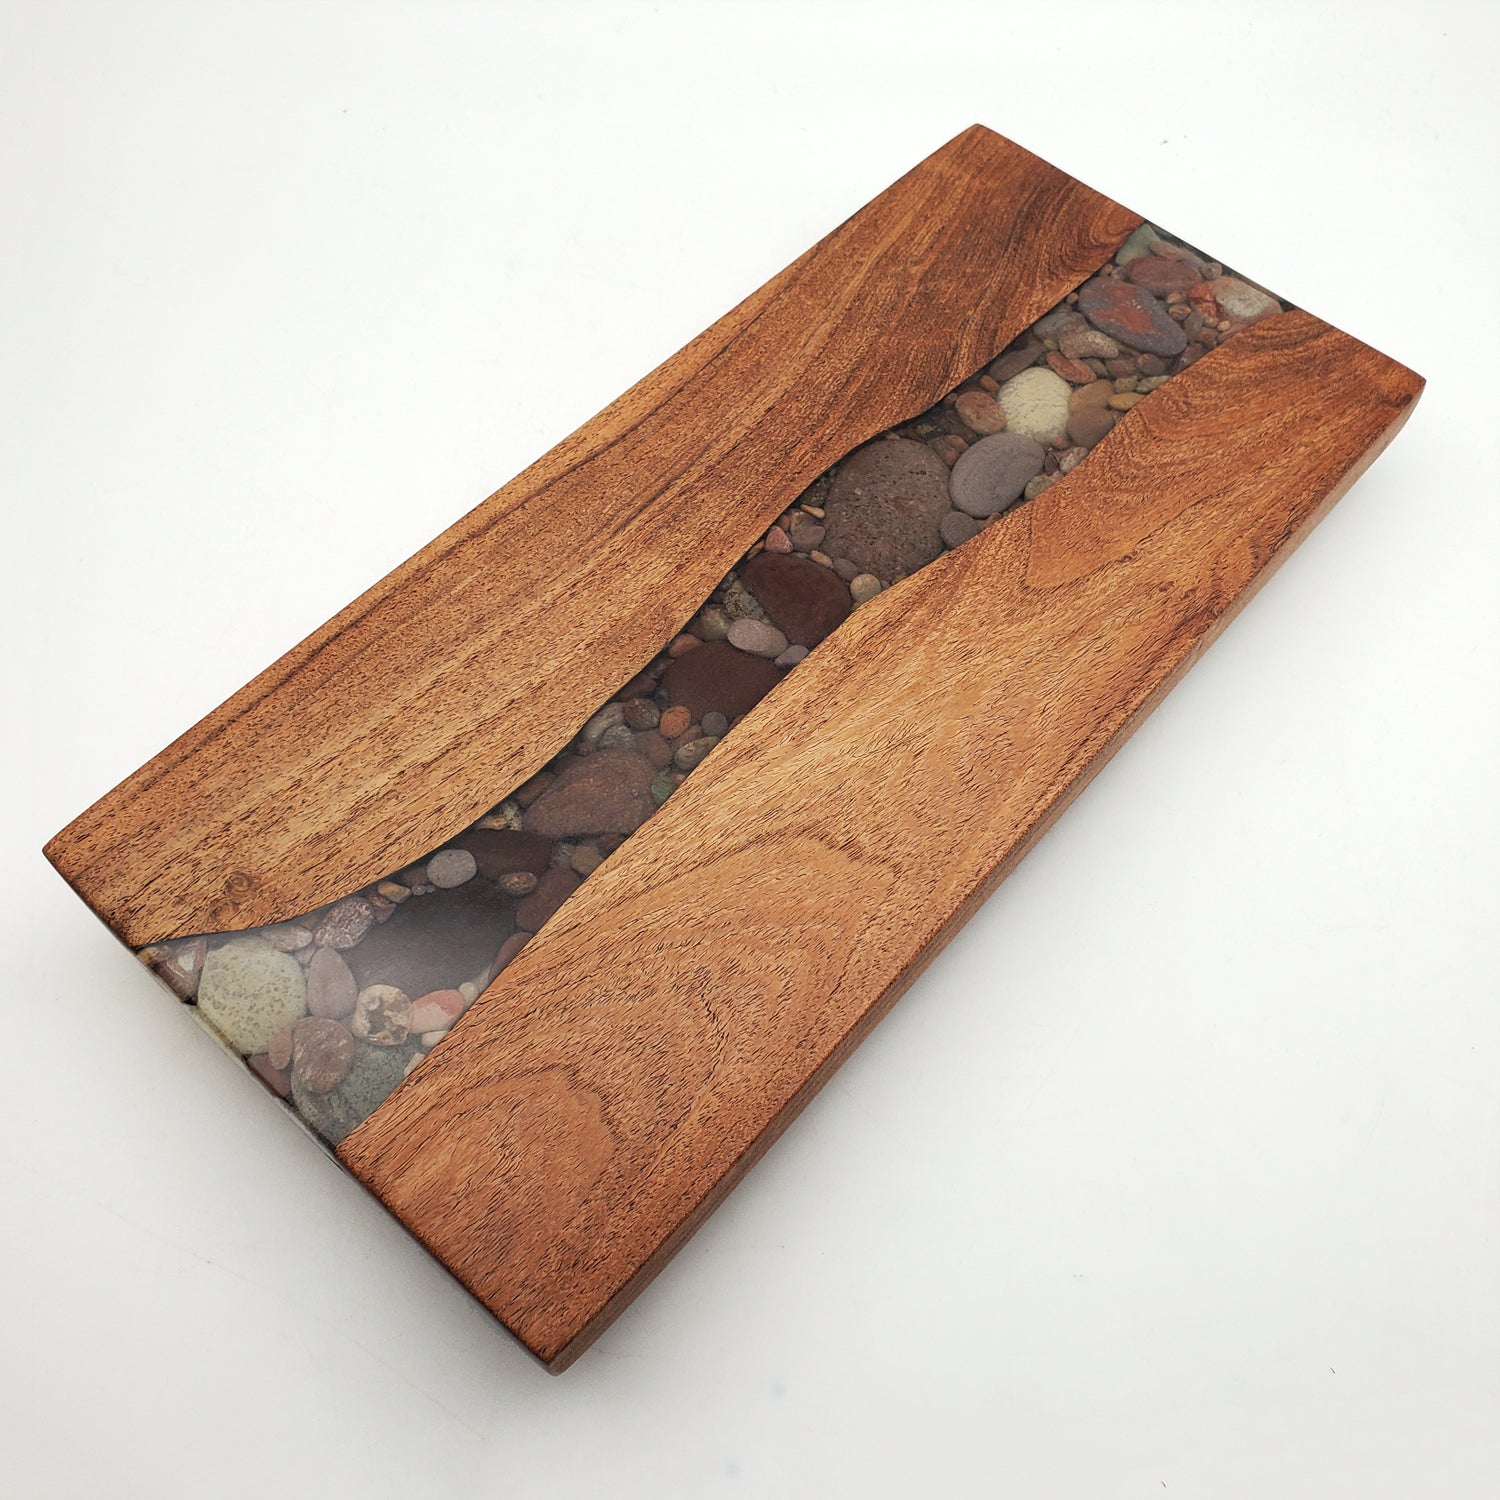 Mesquite Sushi Board with River Rock Inlay